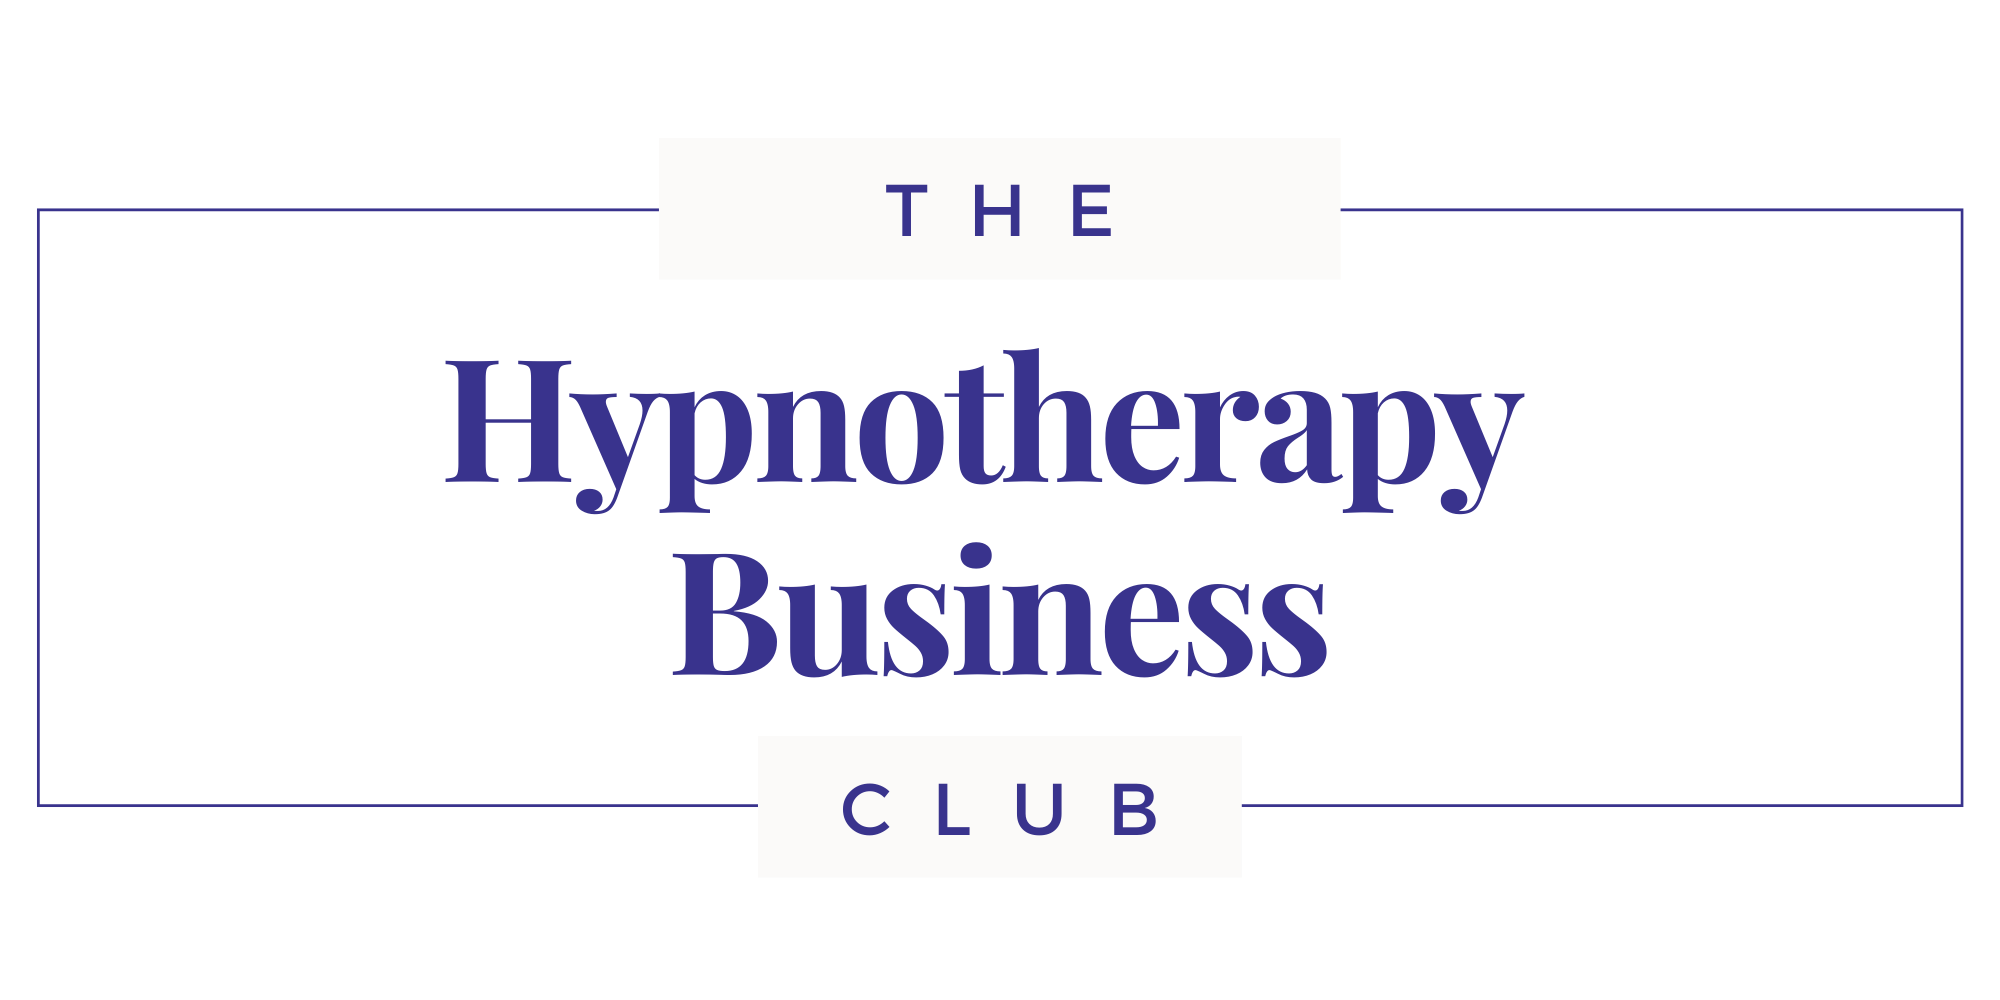 The Hypnotherapy Business club logo